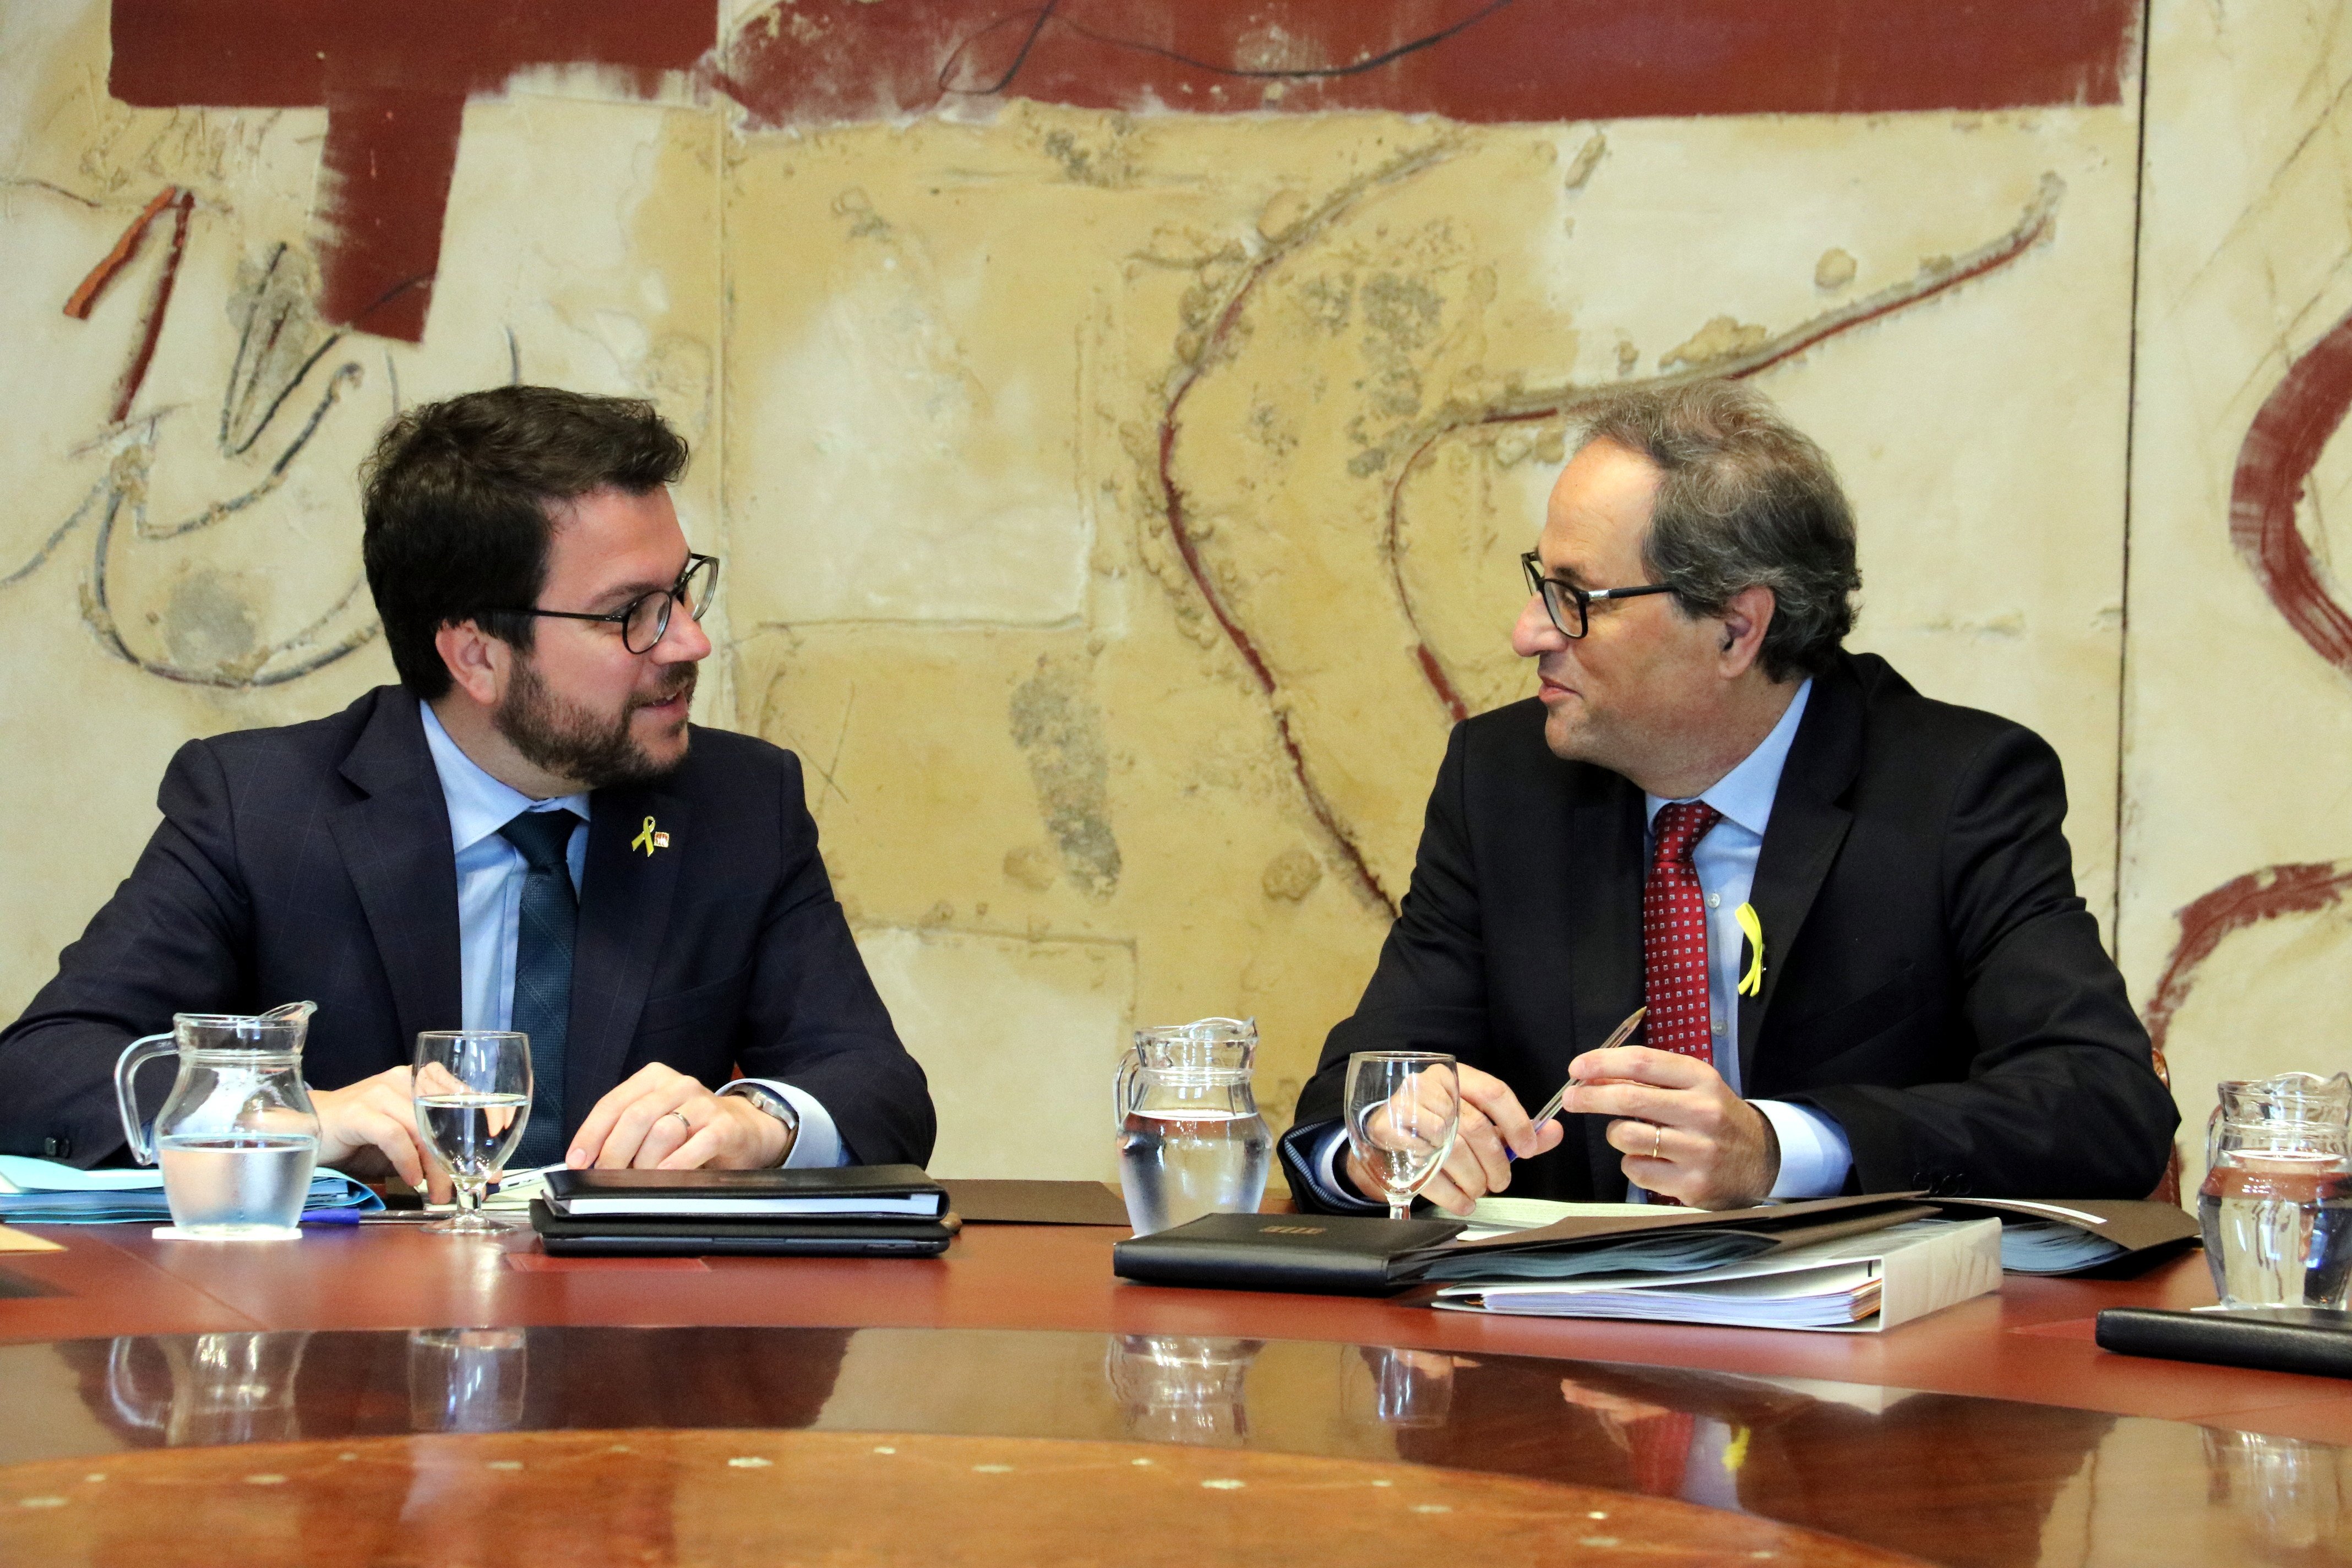 Catalan government to reactivate international presence with "maximum potency"